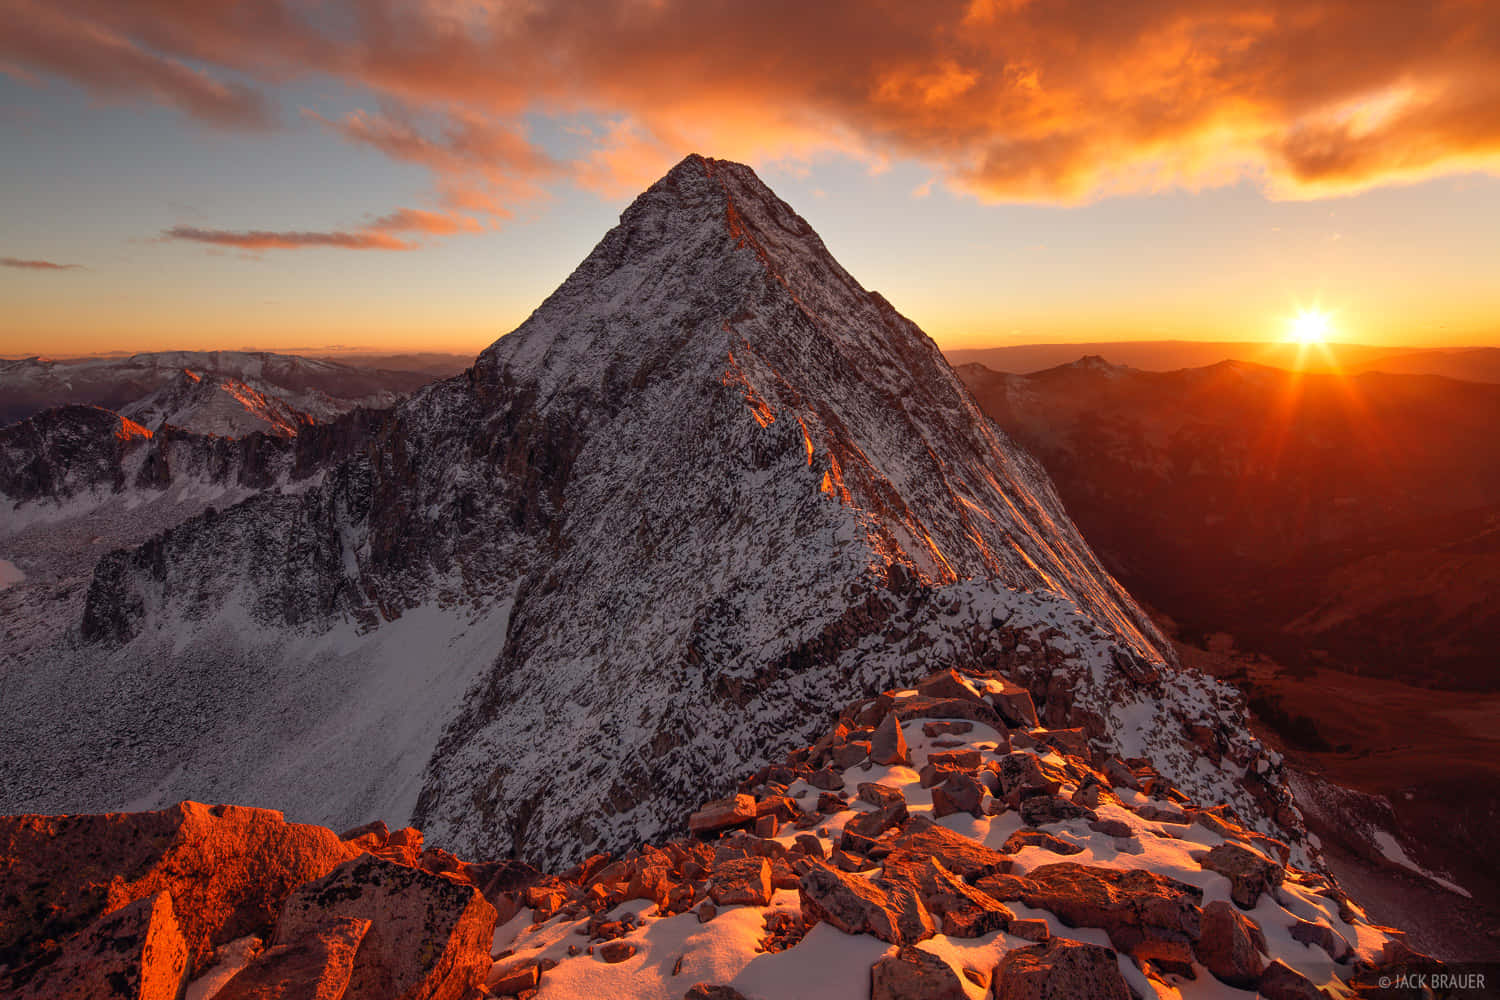 'Behold the majesty of nature in this stunning 4K mountain scene.'